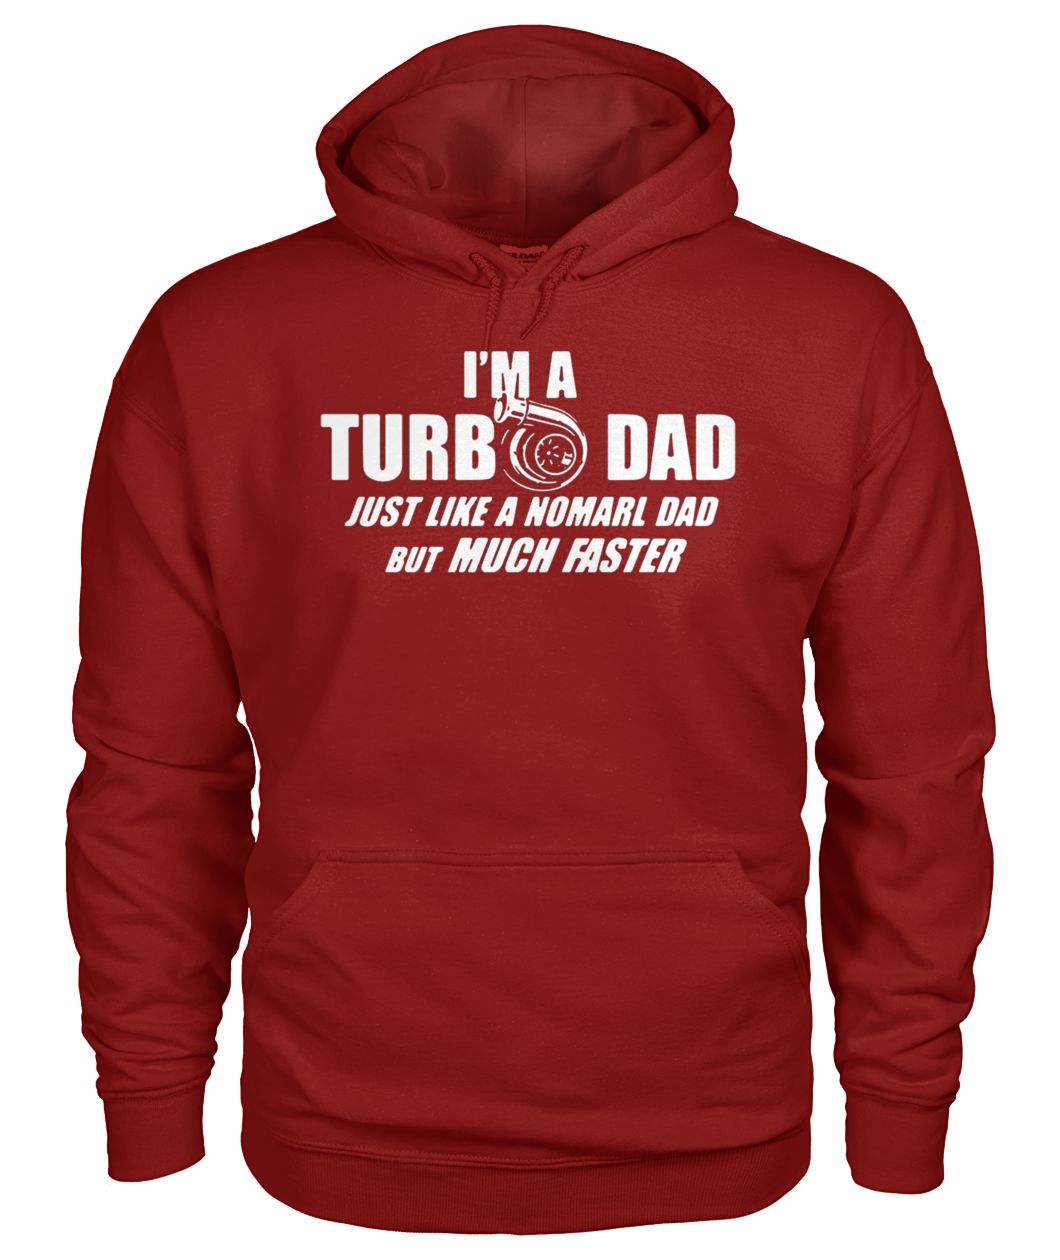 I'm a turbo dad just like a normal dad but much faster gildan hoodie